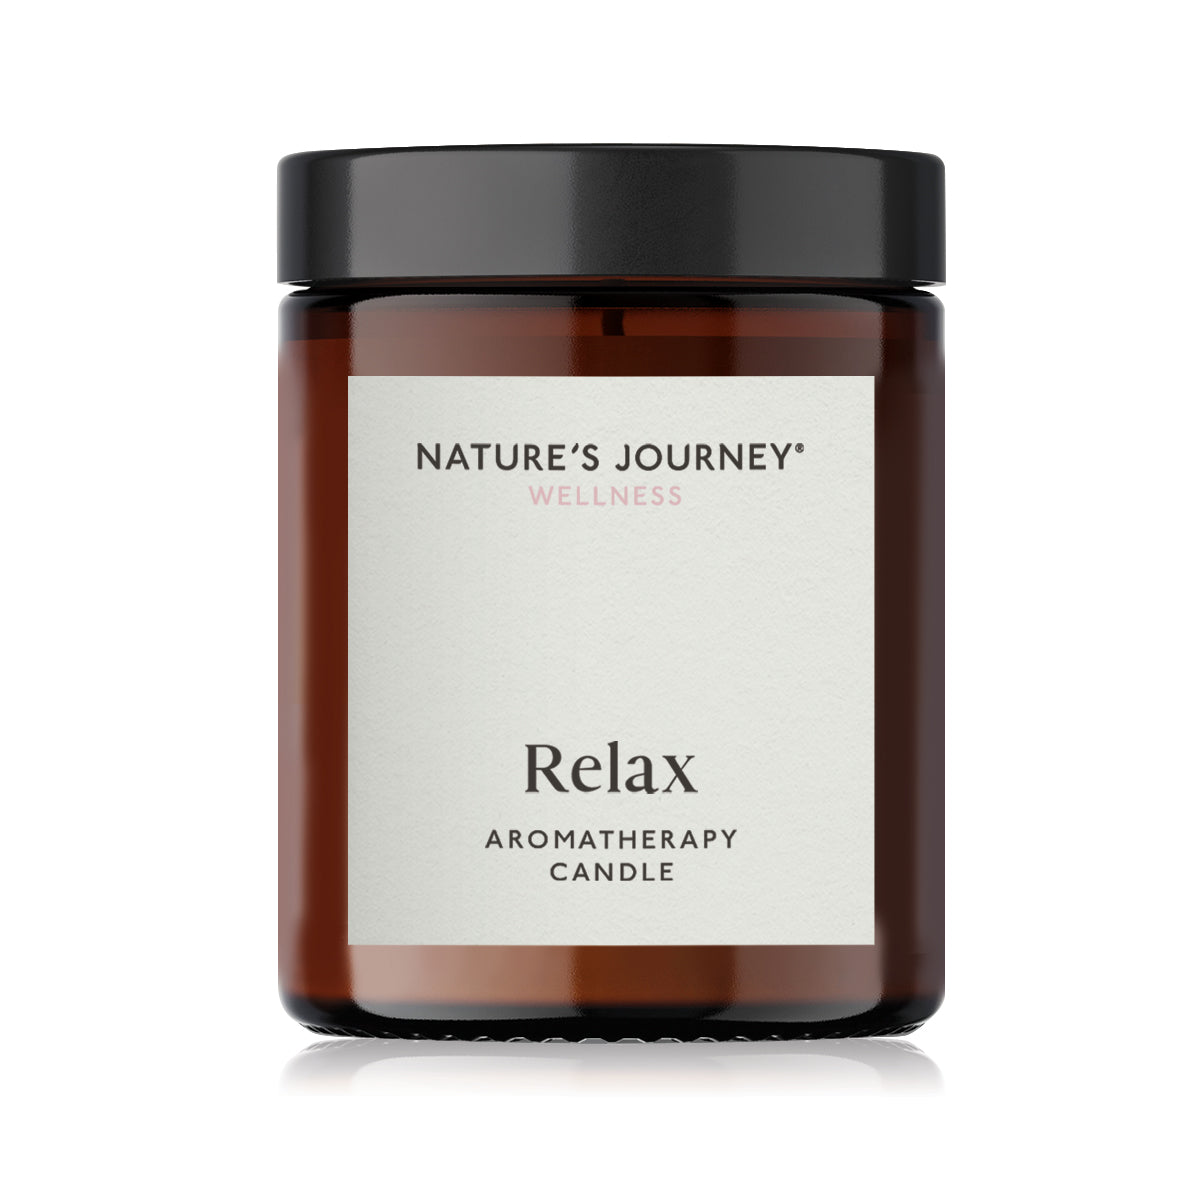 Aromatherapy Candle - Relax